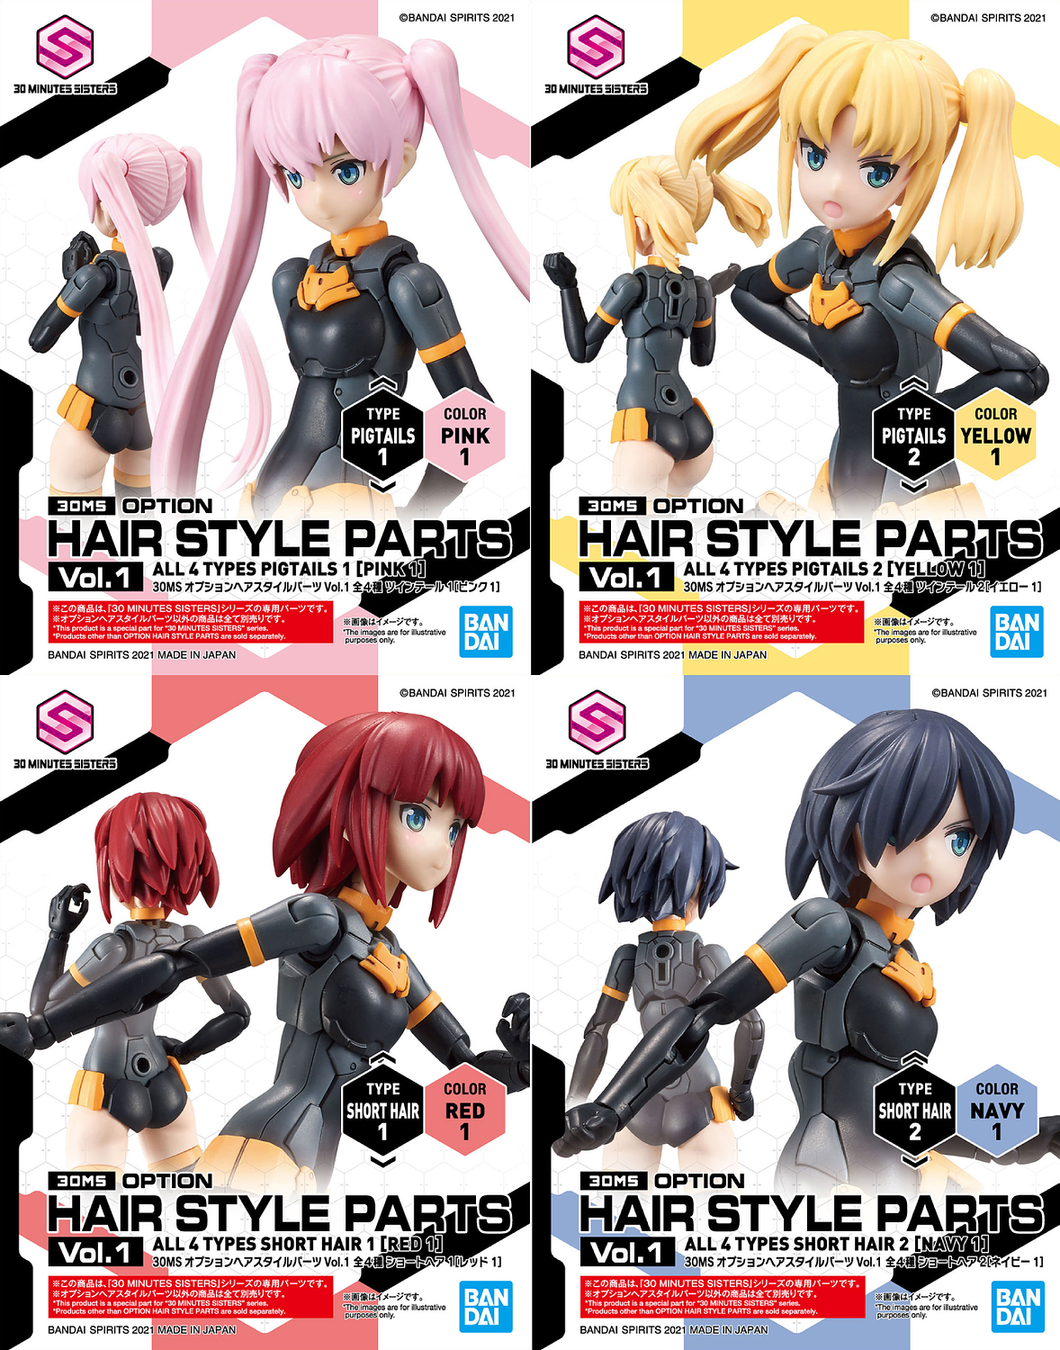 1/144 30MS Option Hairstyle Parts Vol 1 All 4 Types